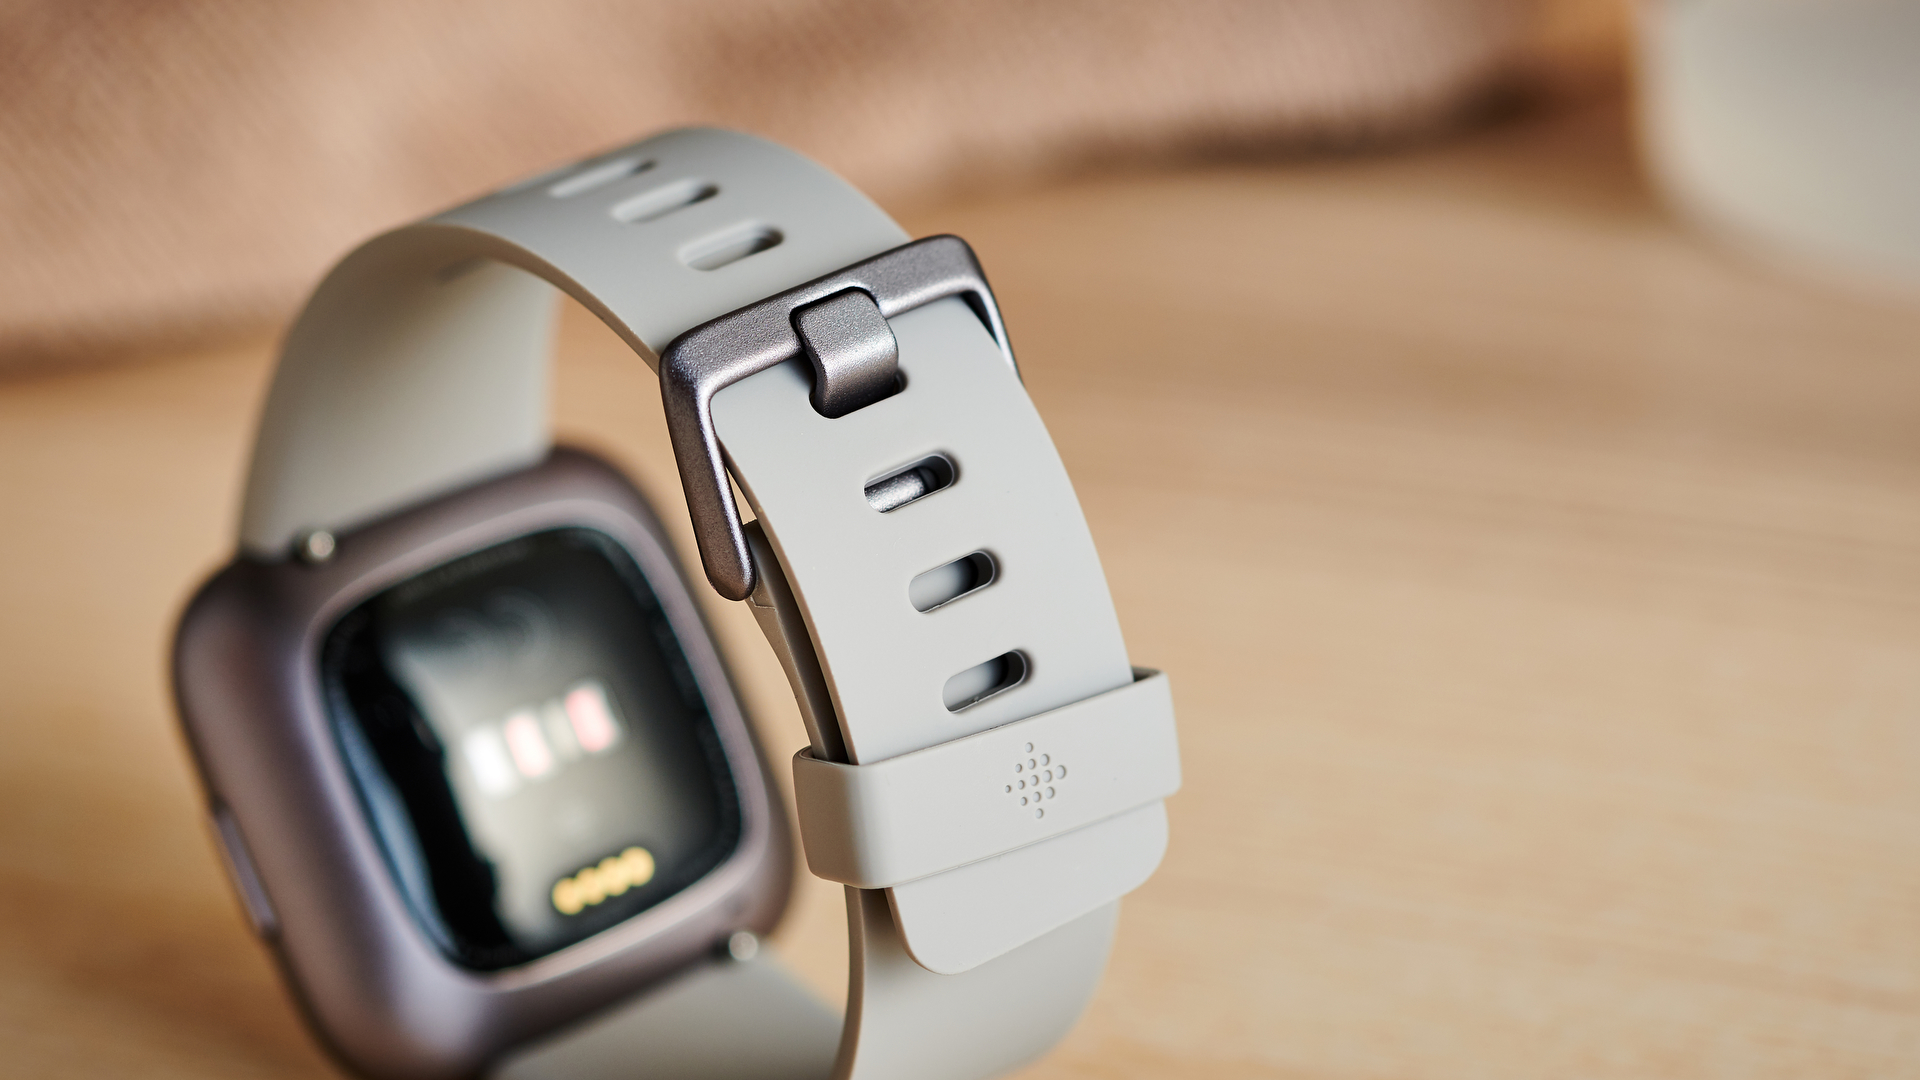 The new Versa 2 has the looks to rival any premium smartwatch